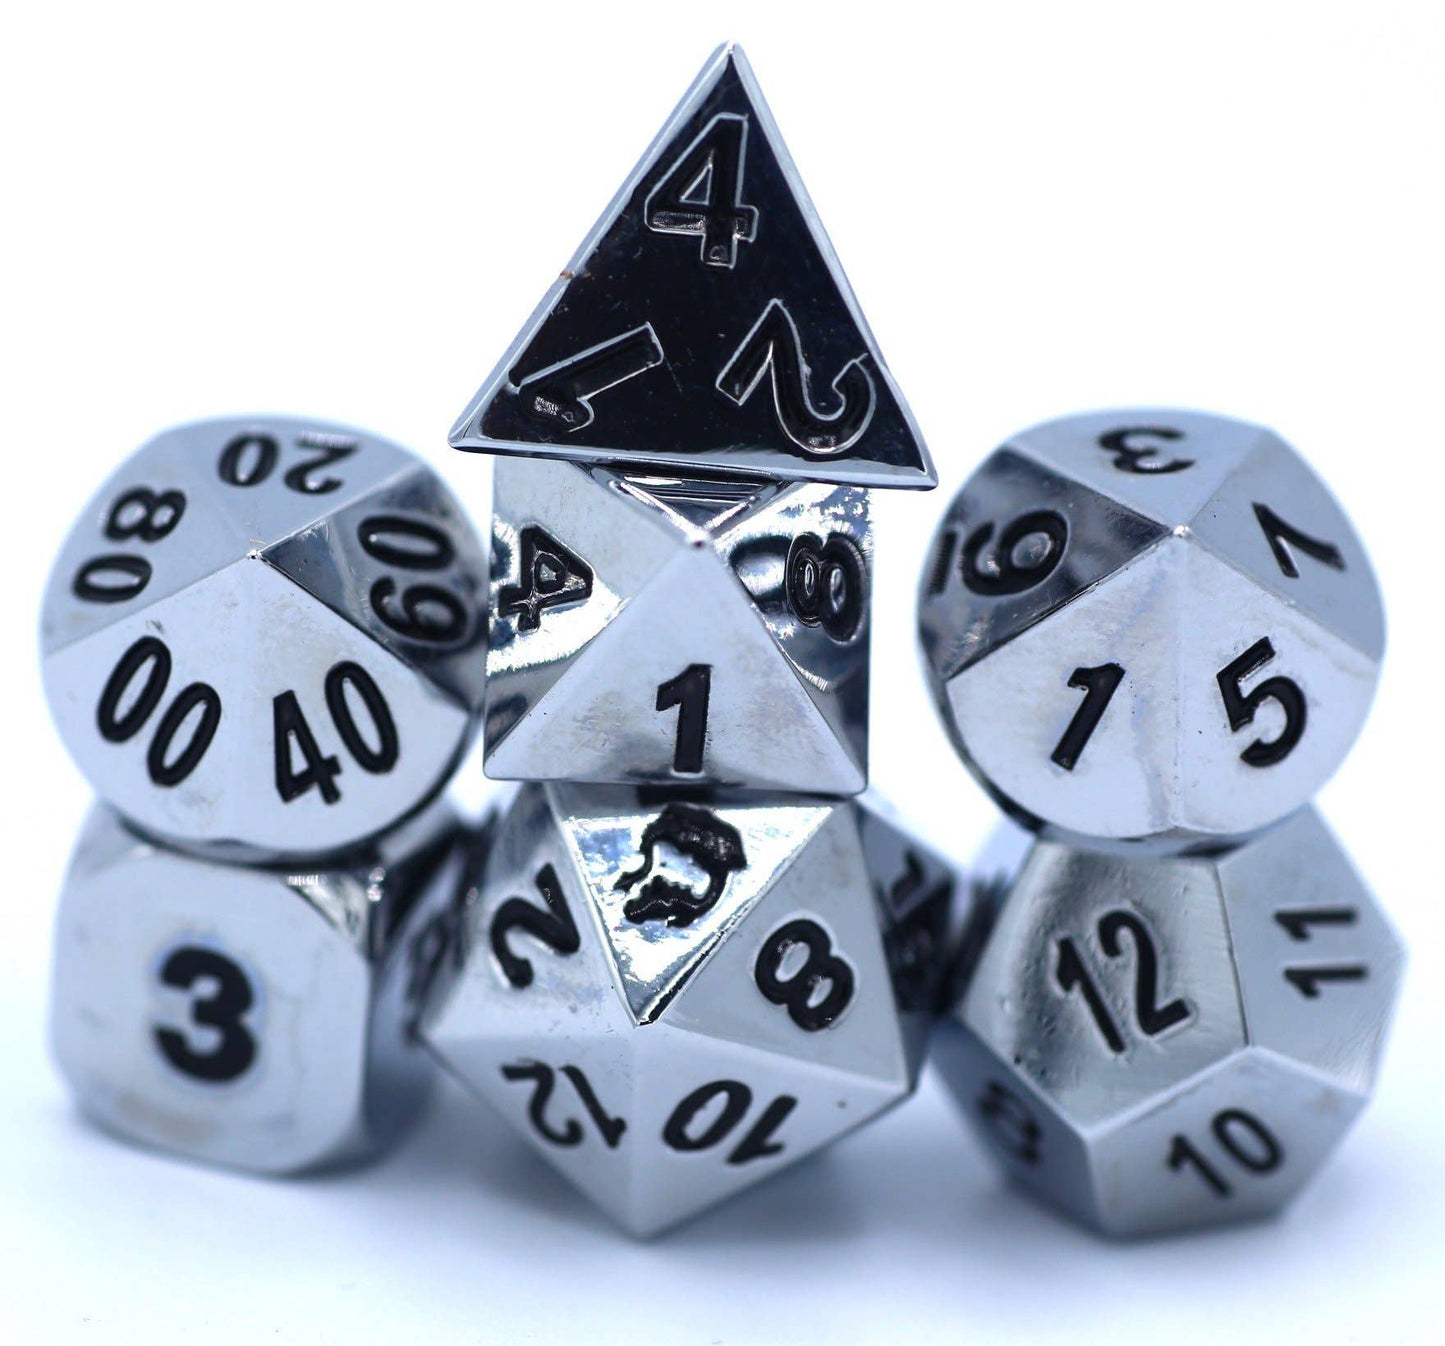 BRH038 Shiny Silver with Black Numbers Basic Dragon Solid Metal Dice set